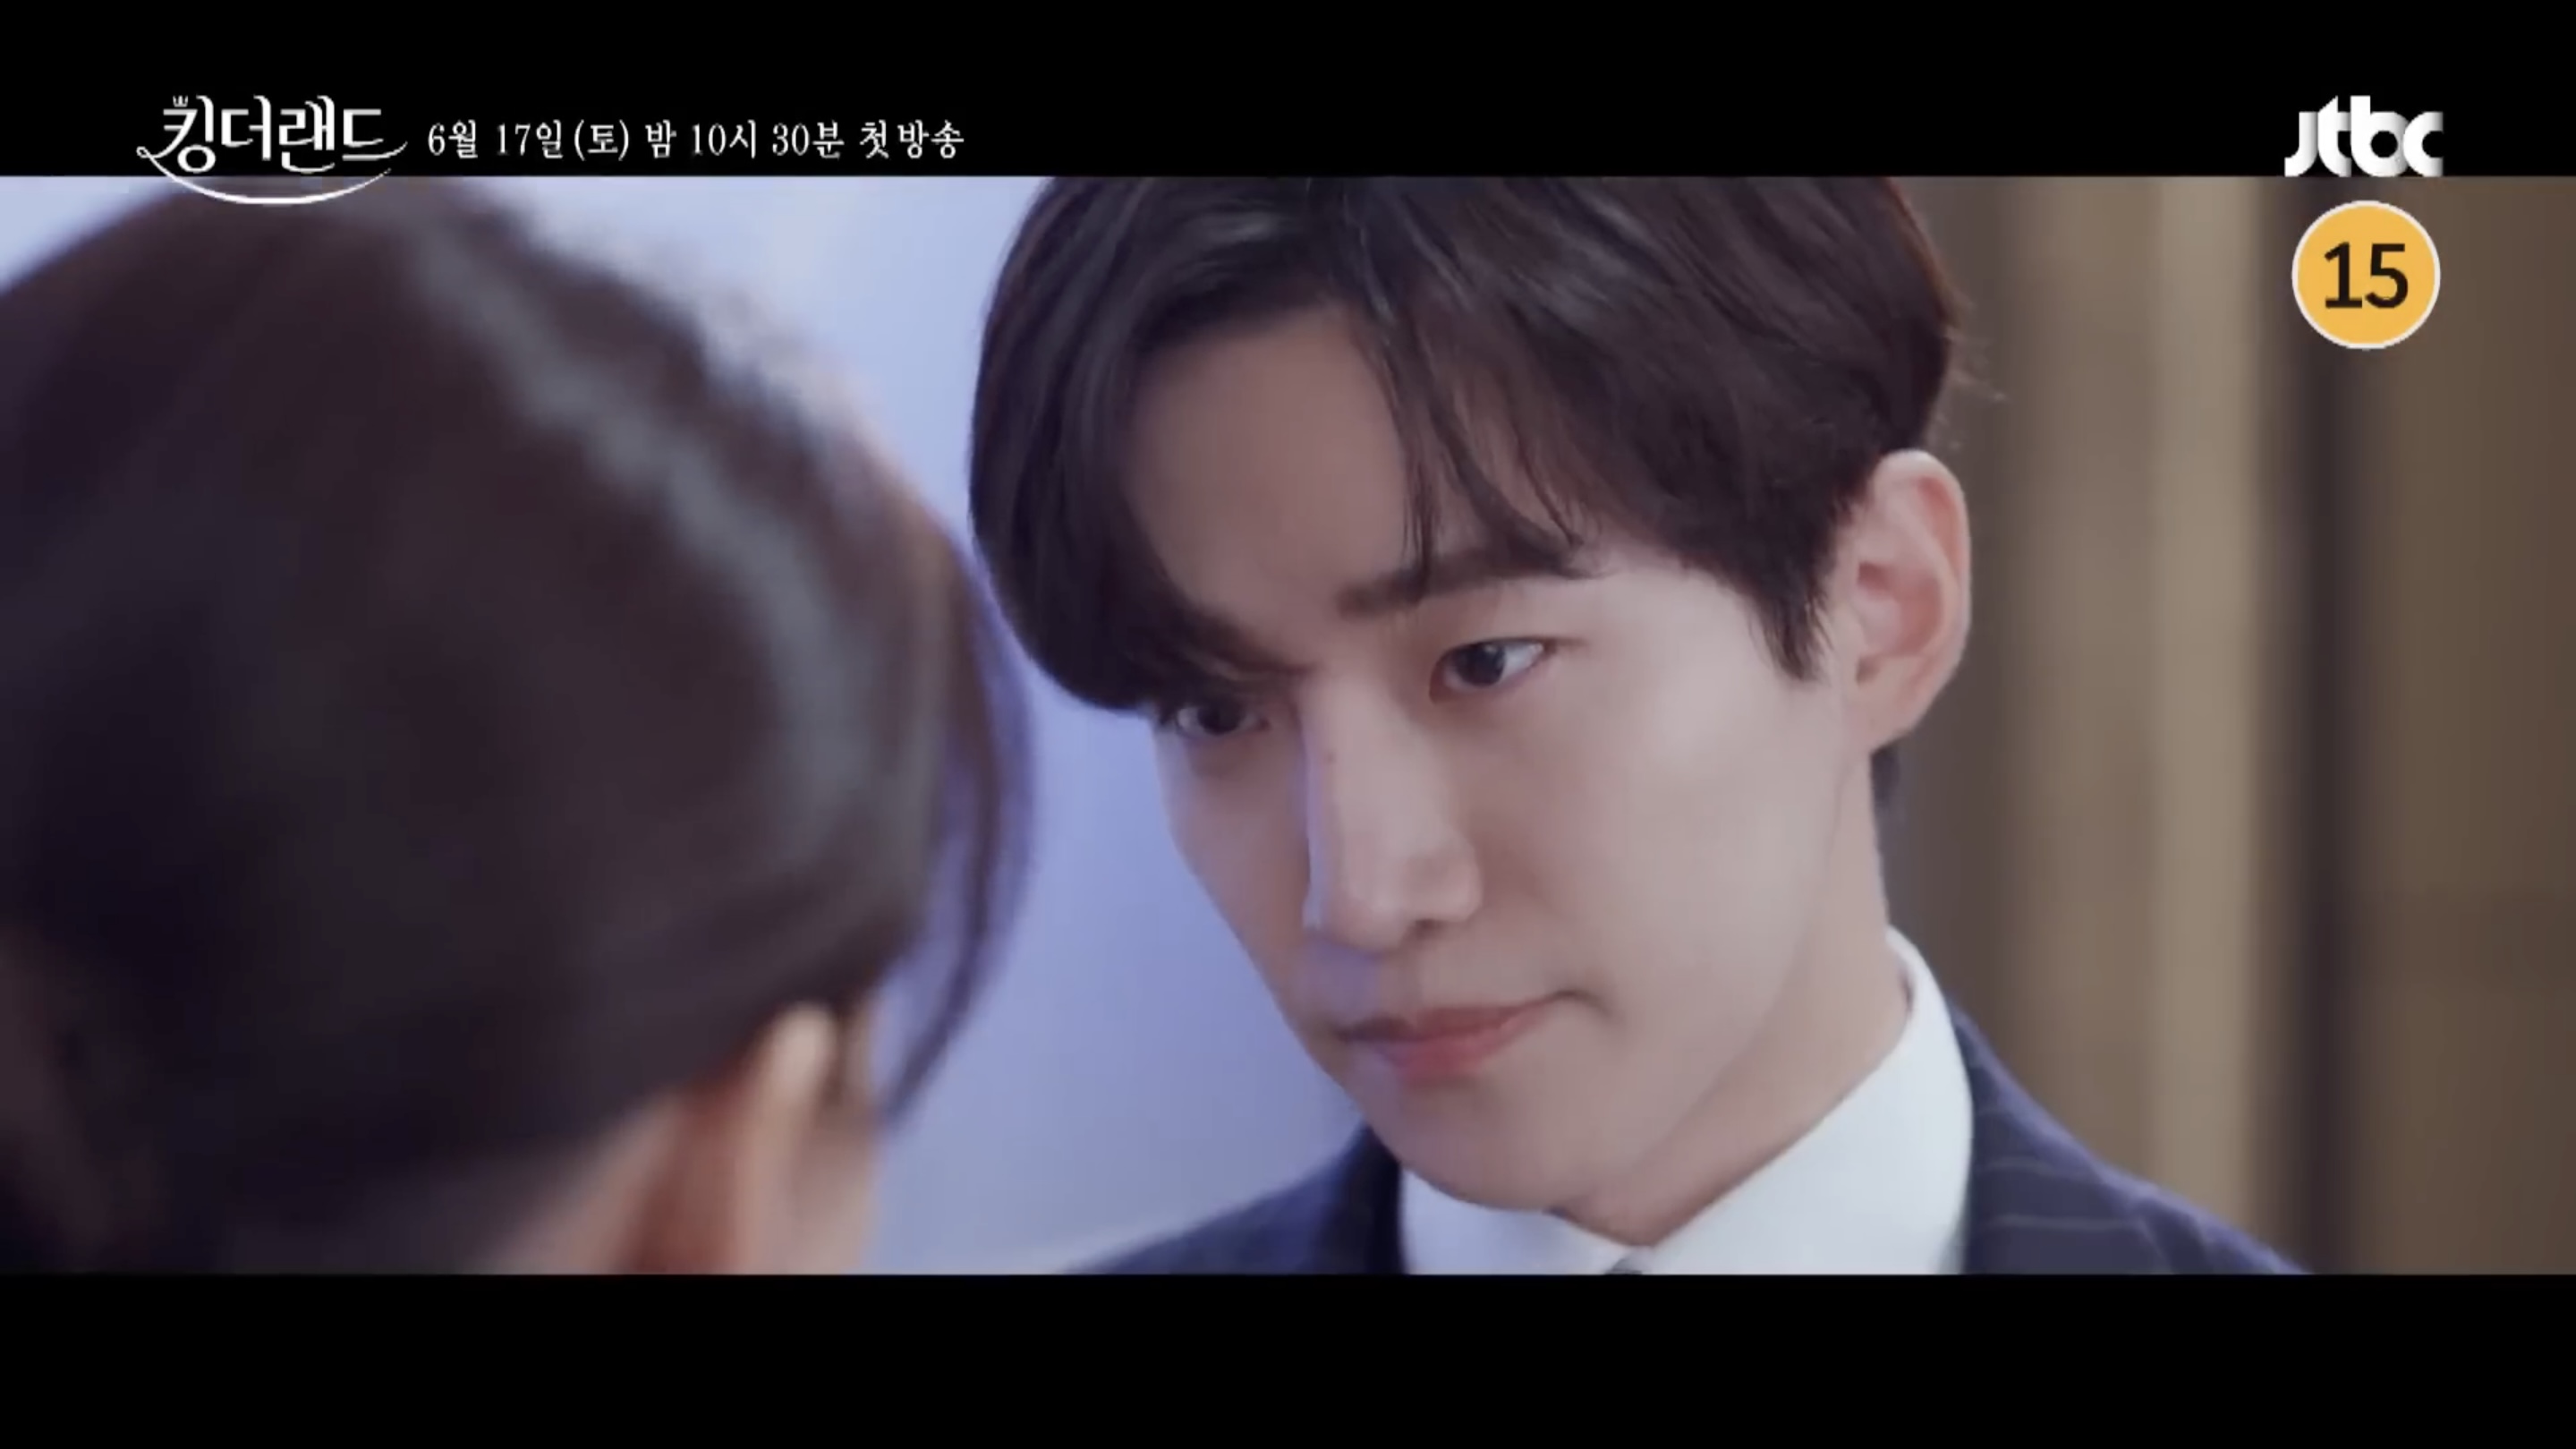 Yoon-ah discovers Junho's identity in King the Land